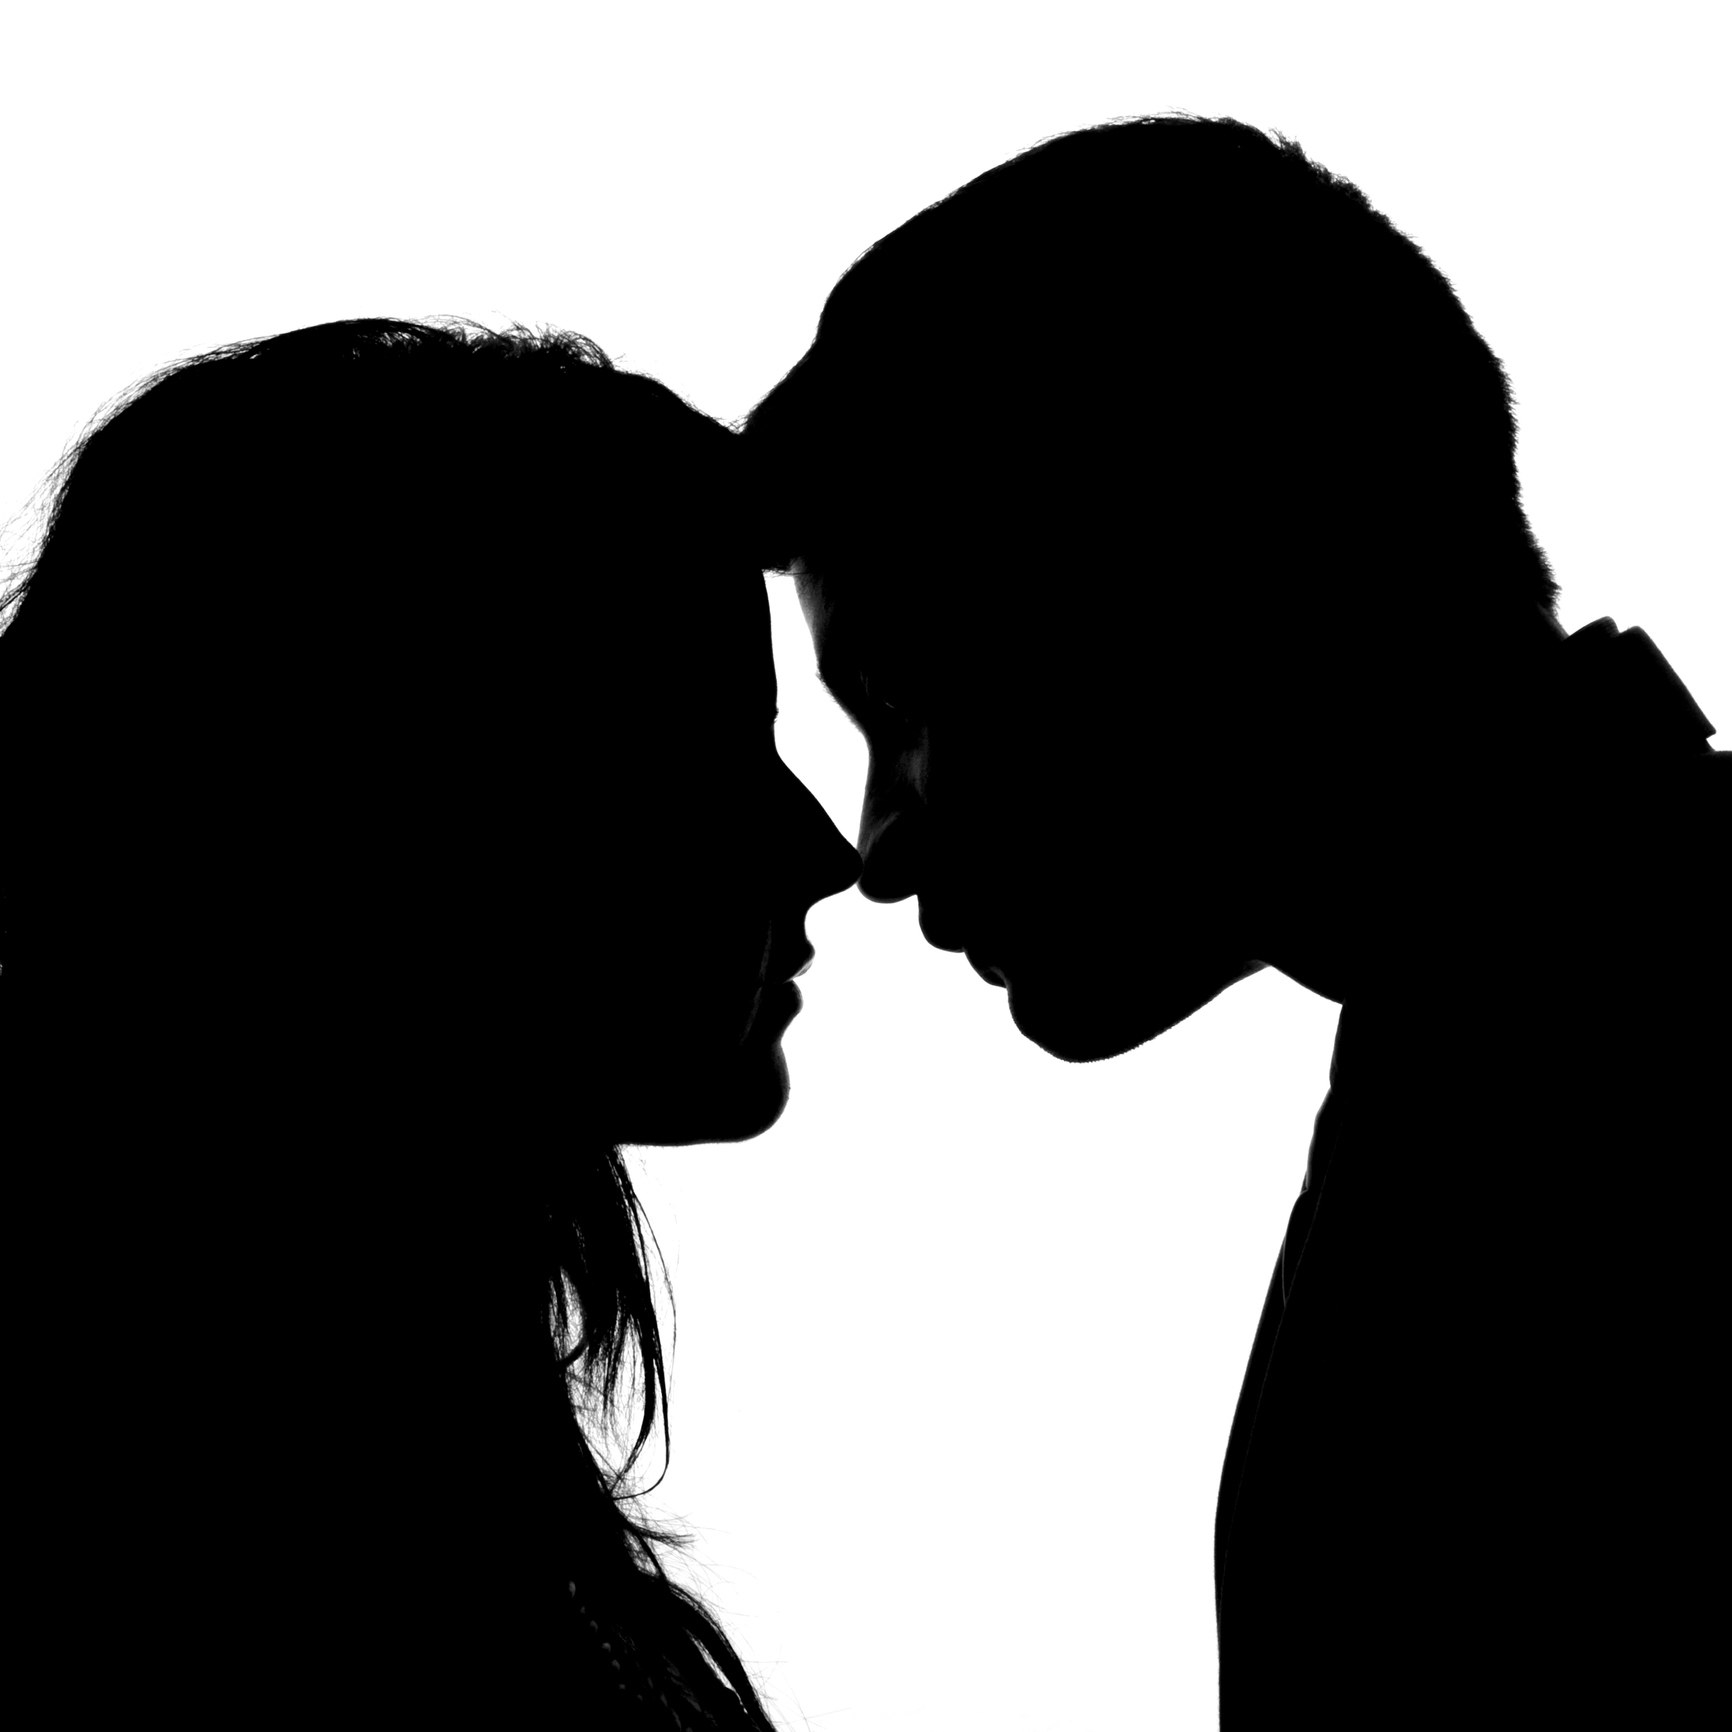 Silhouettes of a couple facing each other